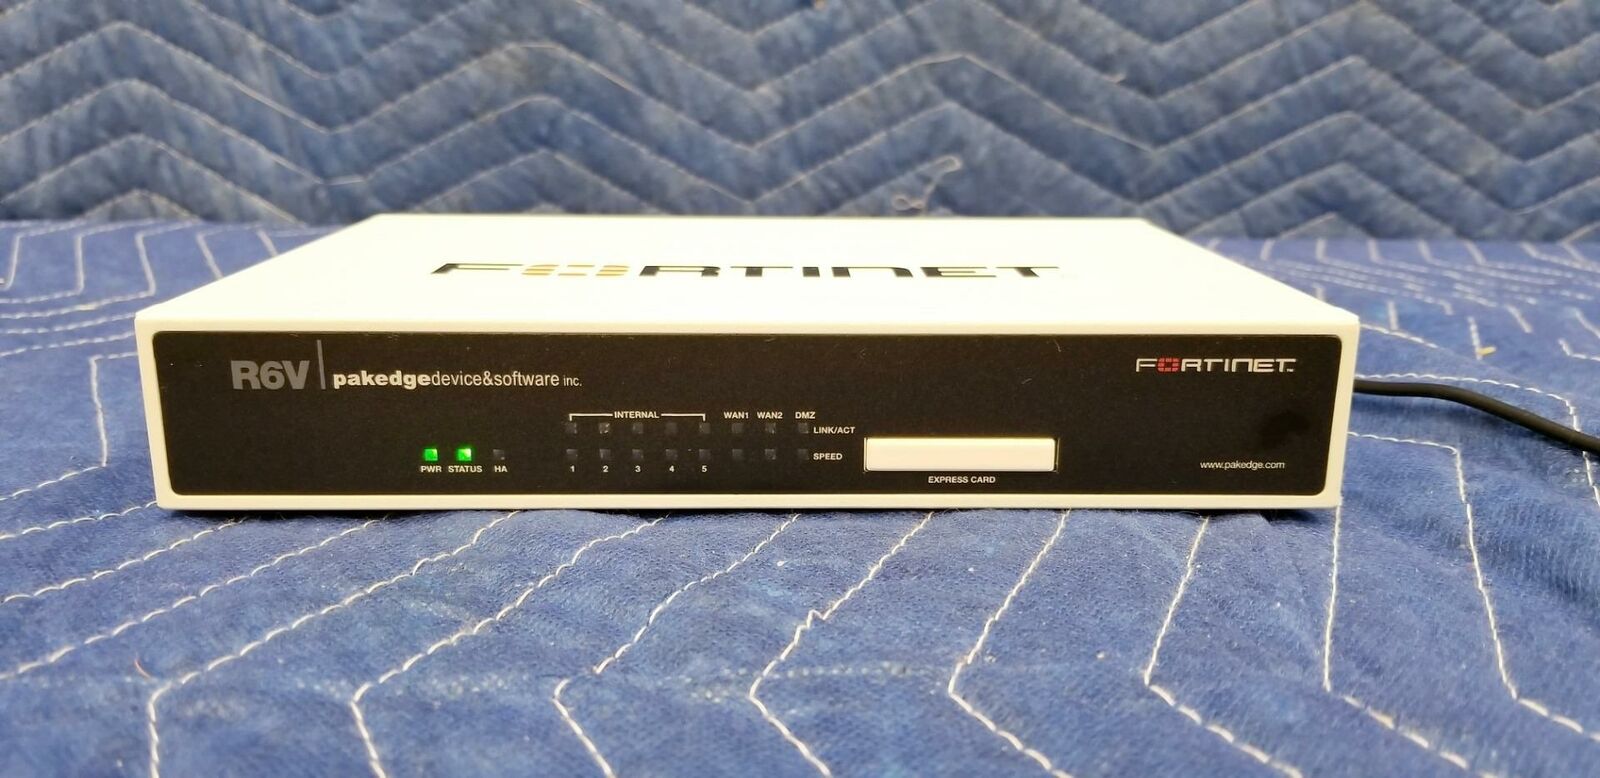 Pakedge R6V FORTINET Router power supply included Make Offer